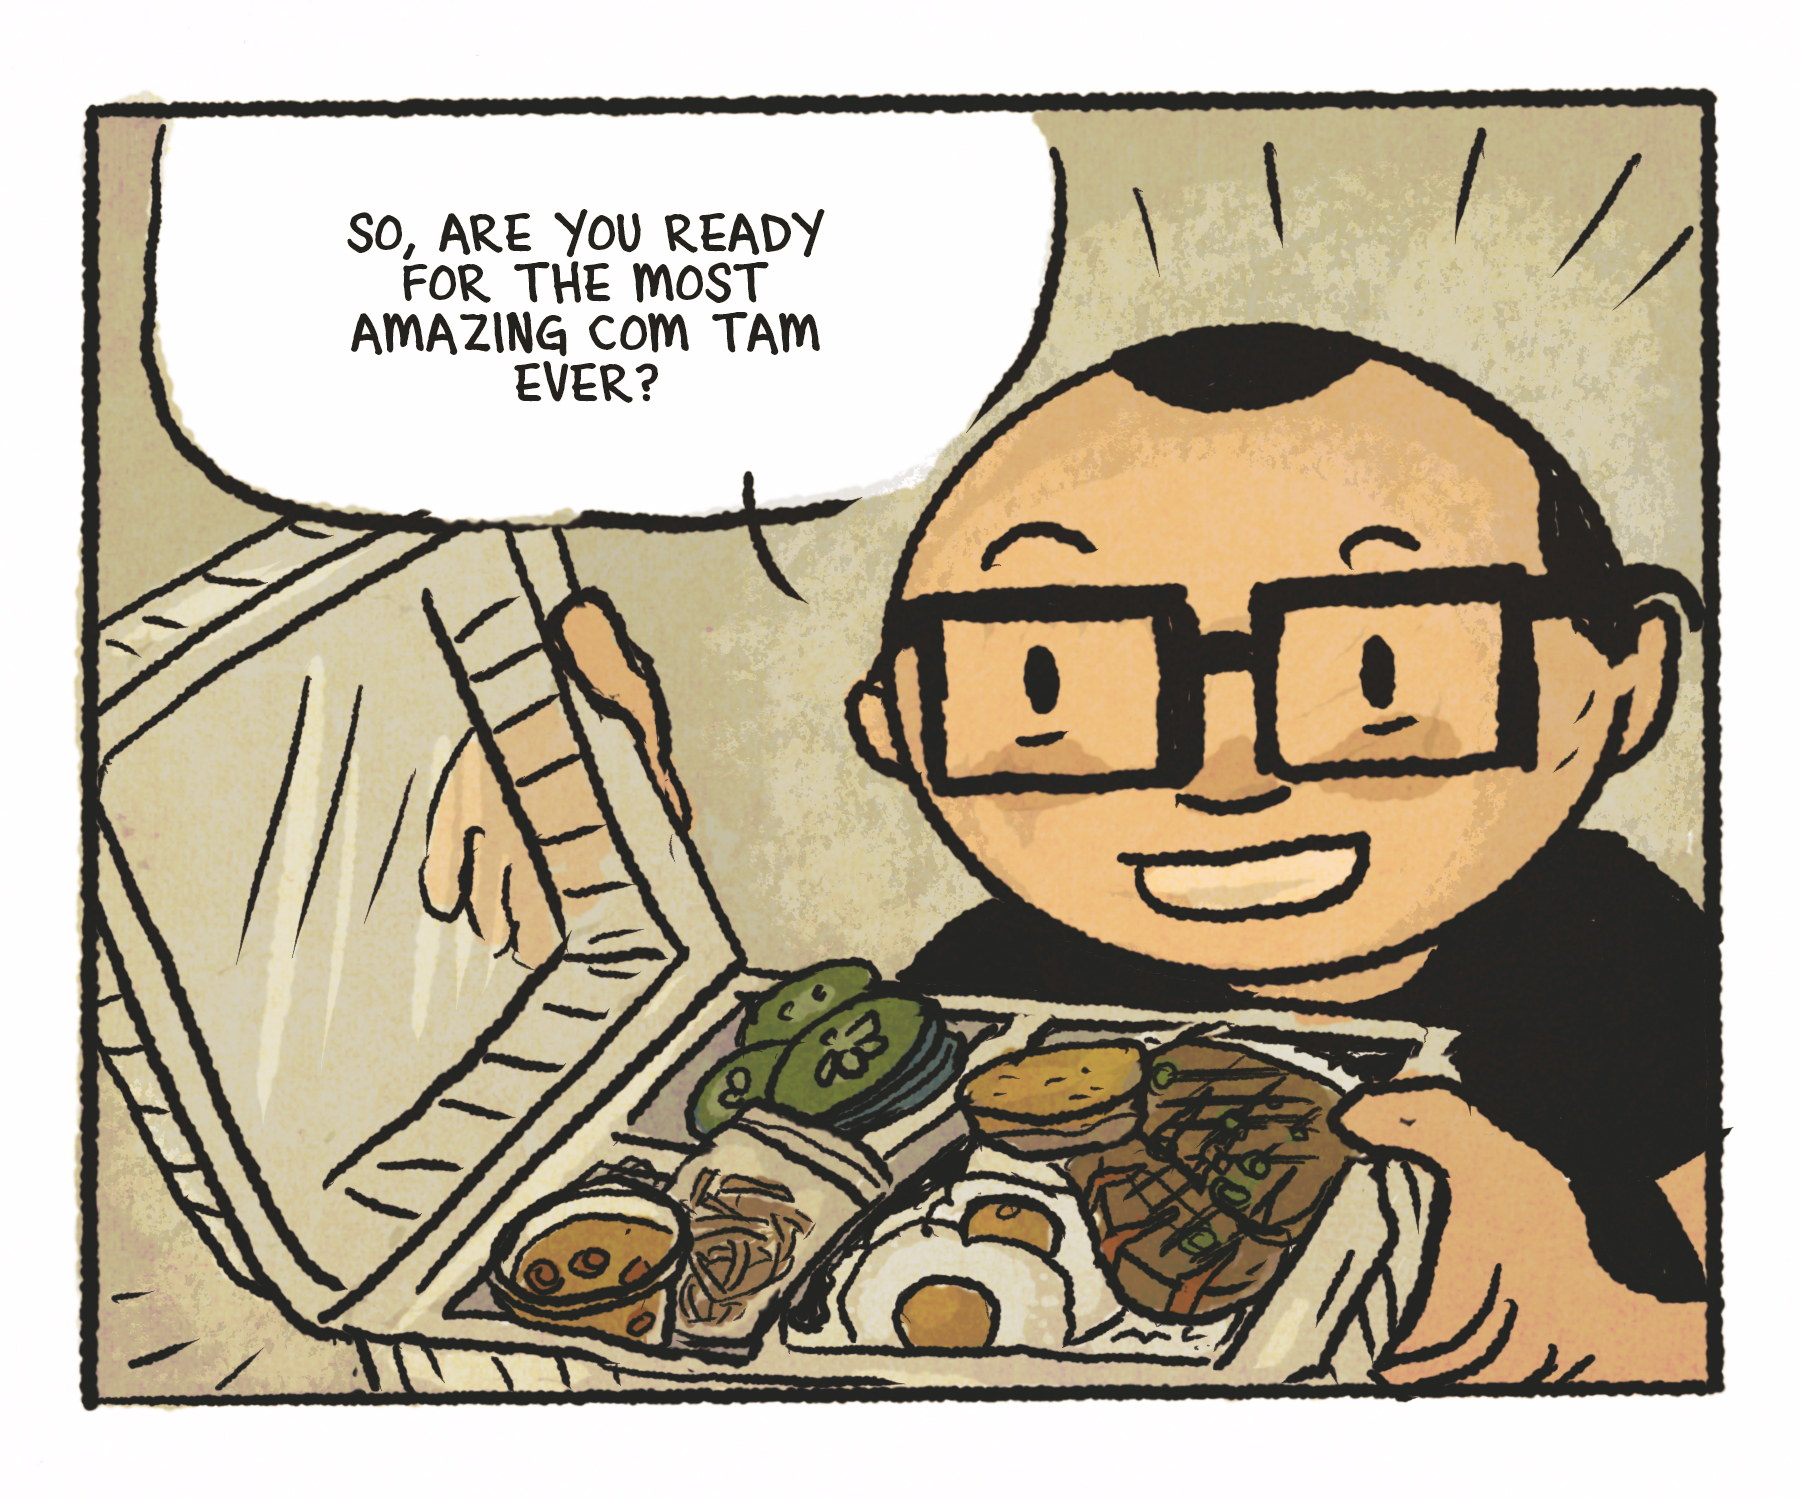 Comics panel: Man looks up, smiling, as he shows off another takeout contain full of rice, fried eggs, a pork chop, and more. Speech bubble: "So, are you ready for the most amazing com tam ever?"